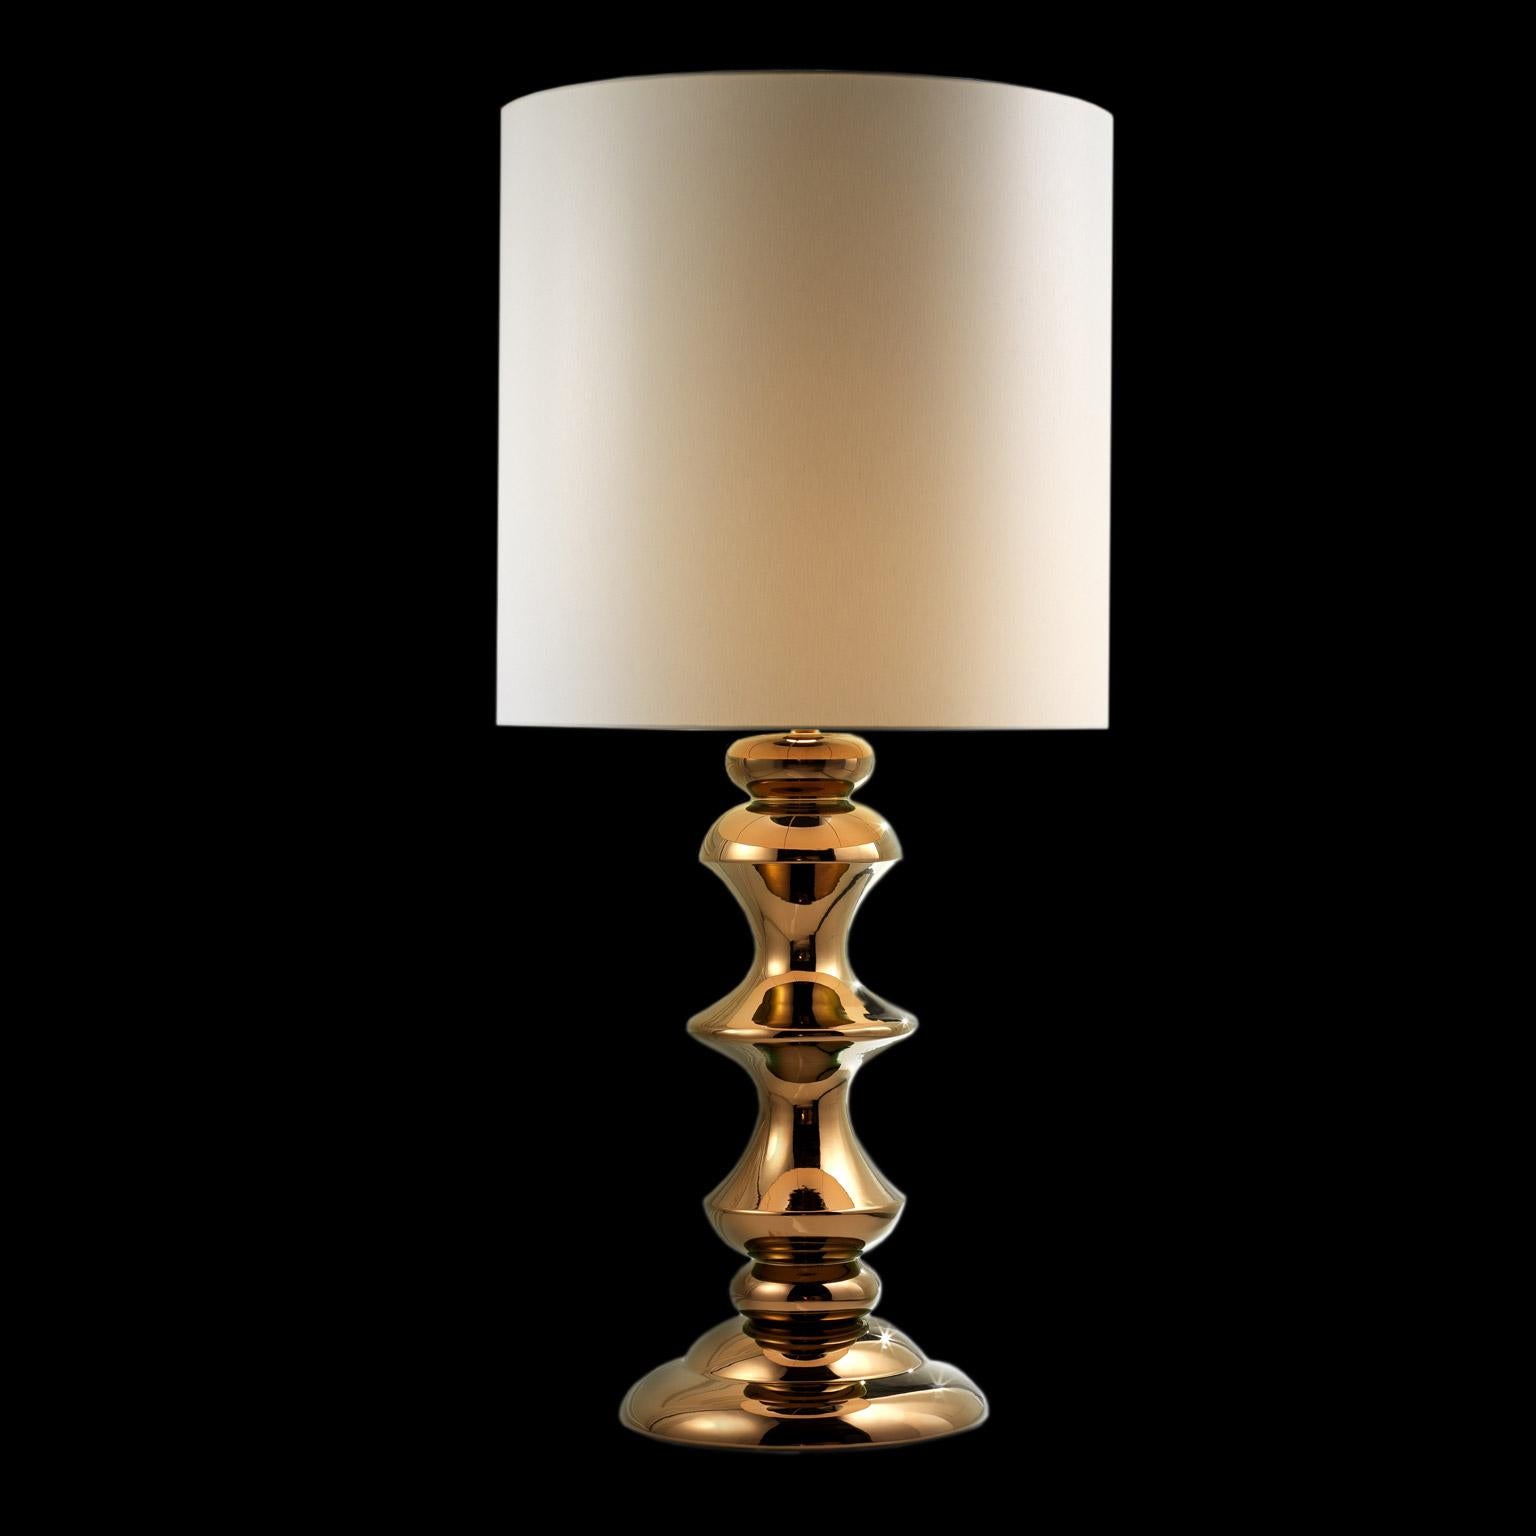 Ceramic lamp MIDA2
cod. LM002
handcrafted in bronze 
with cotton lampshade

Measures: 
H. 120.0 cm.
Dm. 50.0 cm.